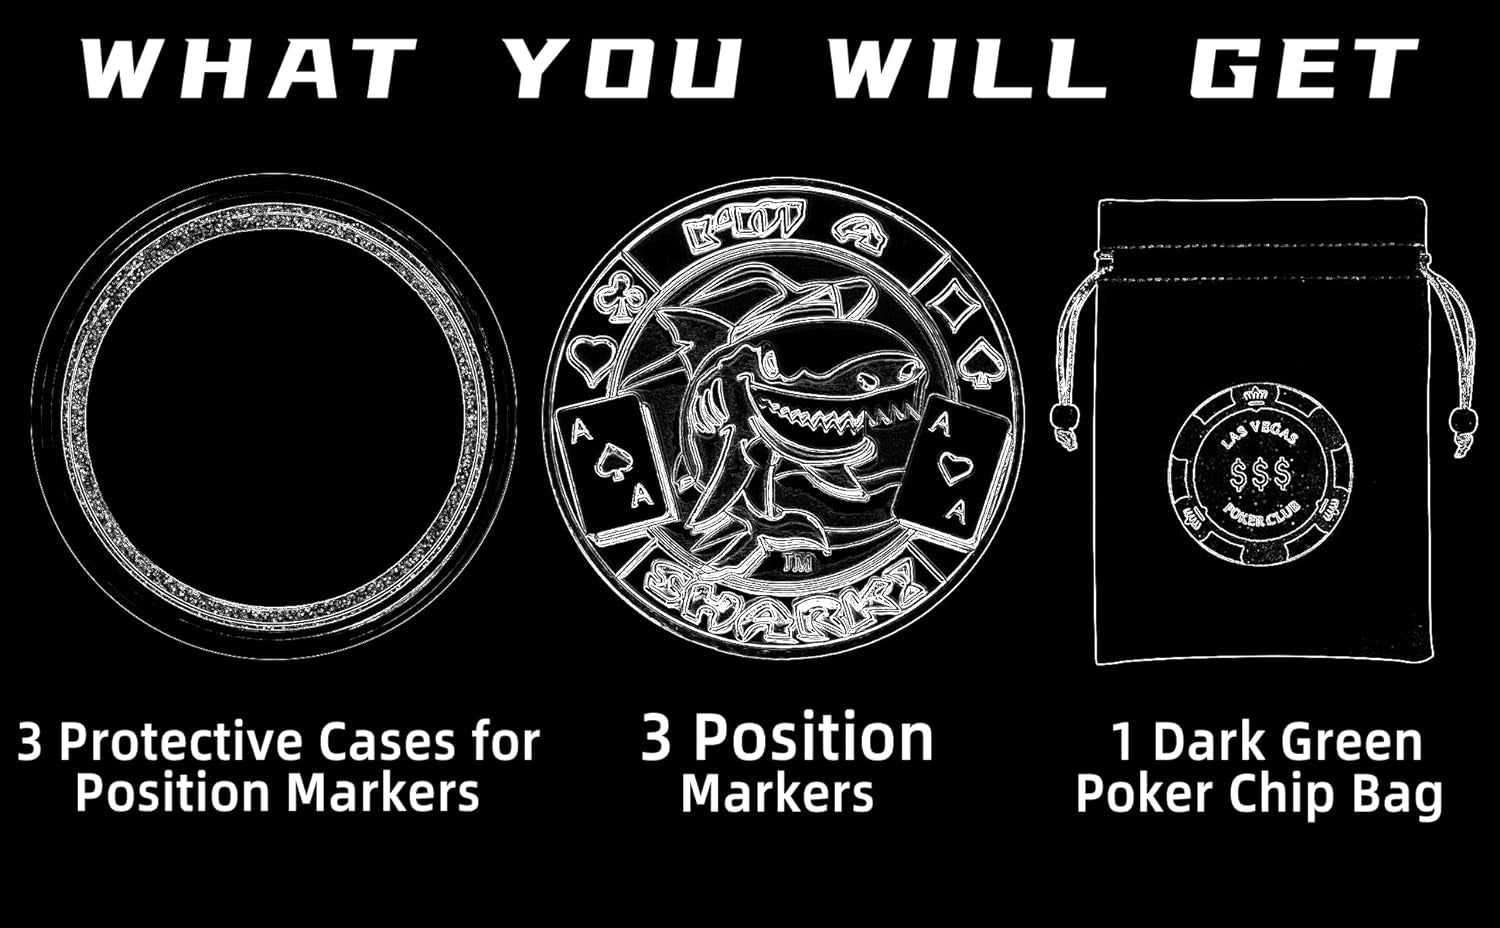 Dealer Button, Small Blind, Big Blind, Poker Guard, Poker Gifts for Men, Poker Accessories, Coin Collectibles, Poker Chips Coin with Plastic Case (Position Marker), 3 Pcs